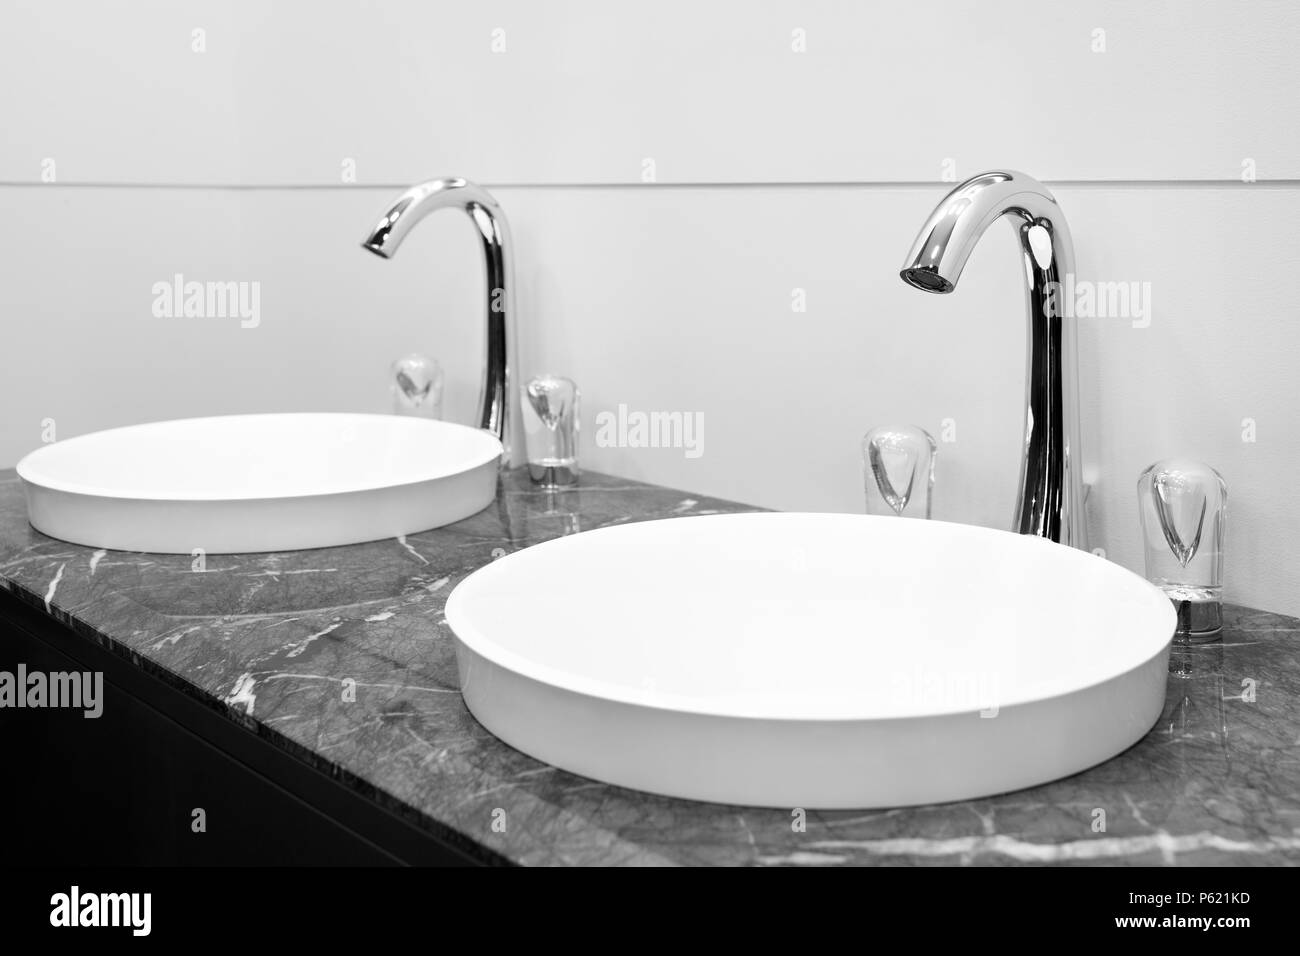 Bathroom black and white interior with two sink and faucet Stock Photo